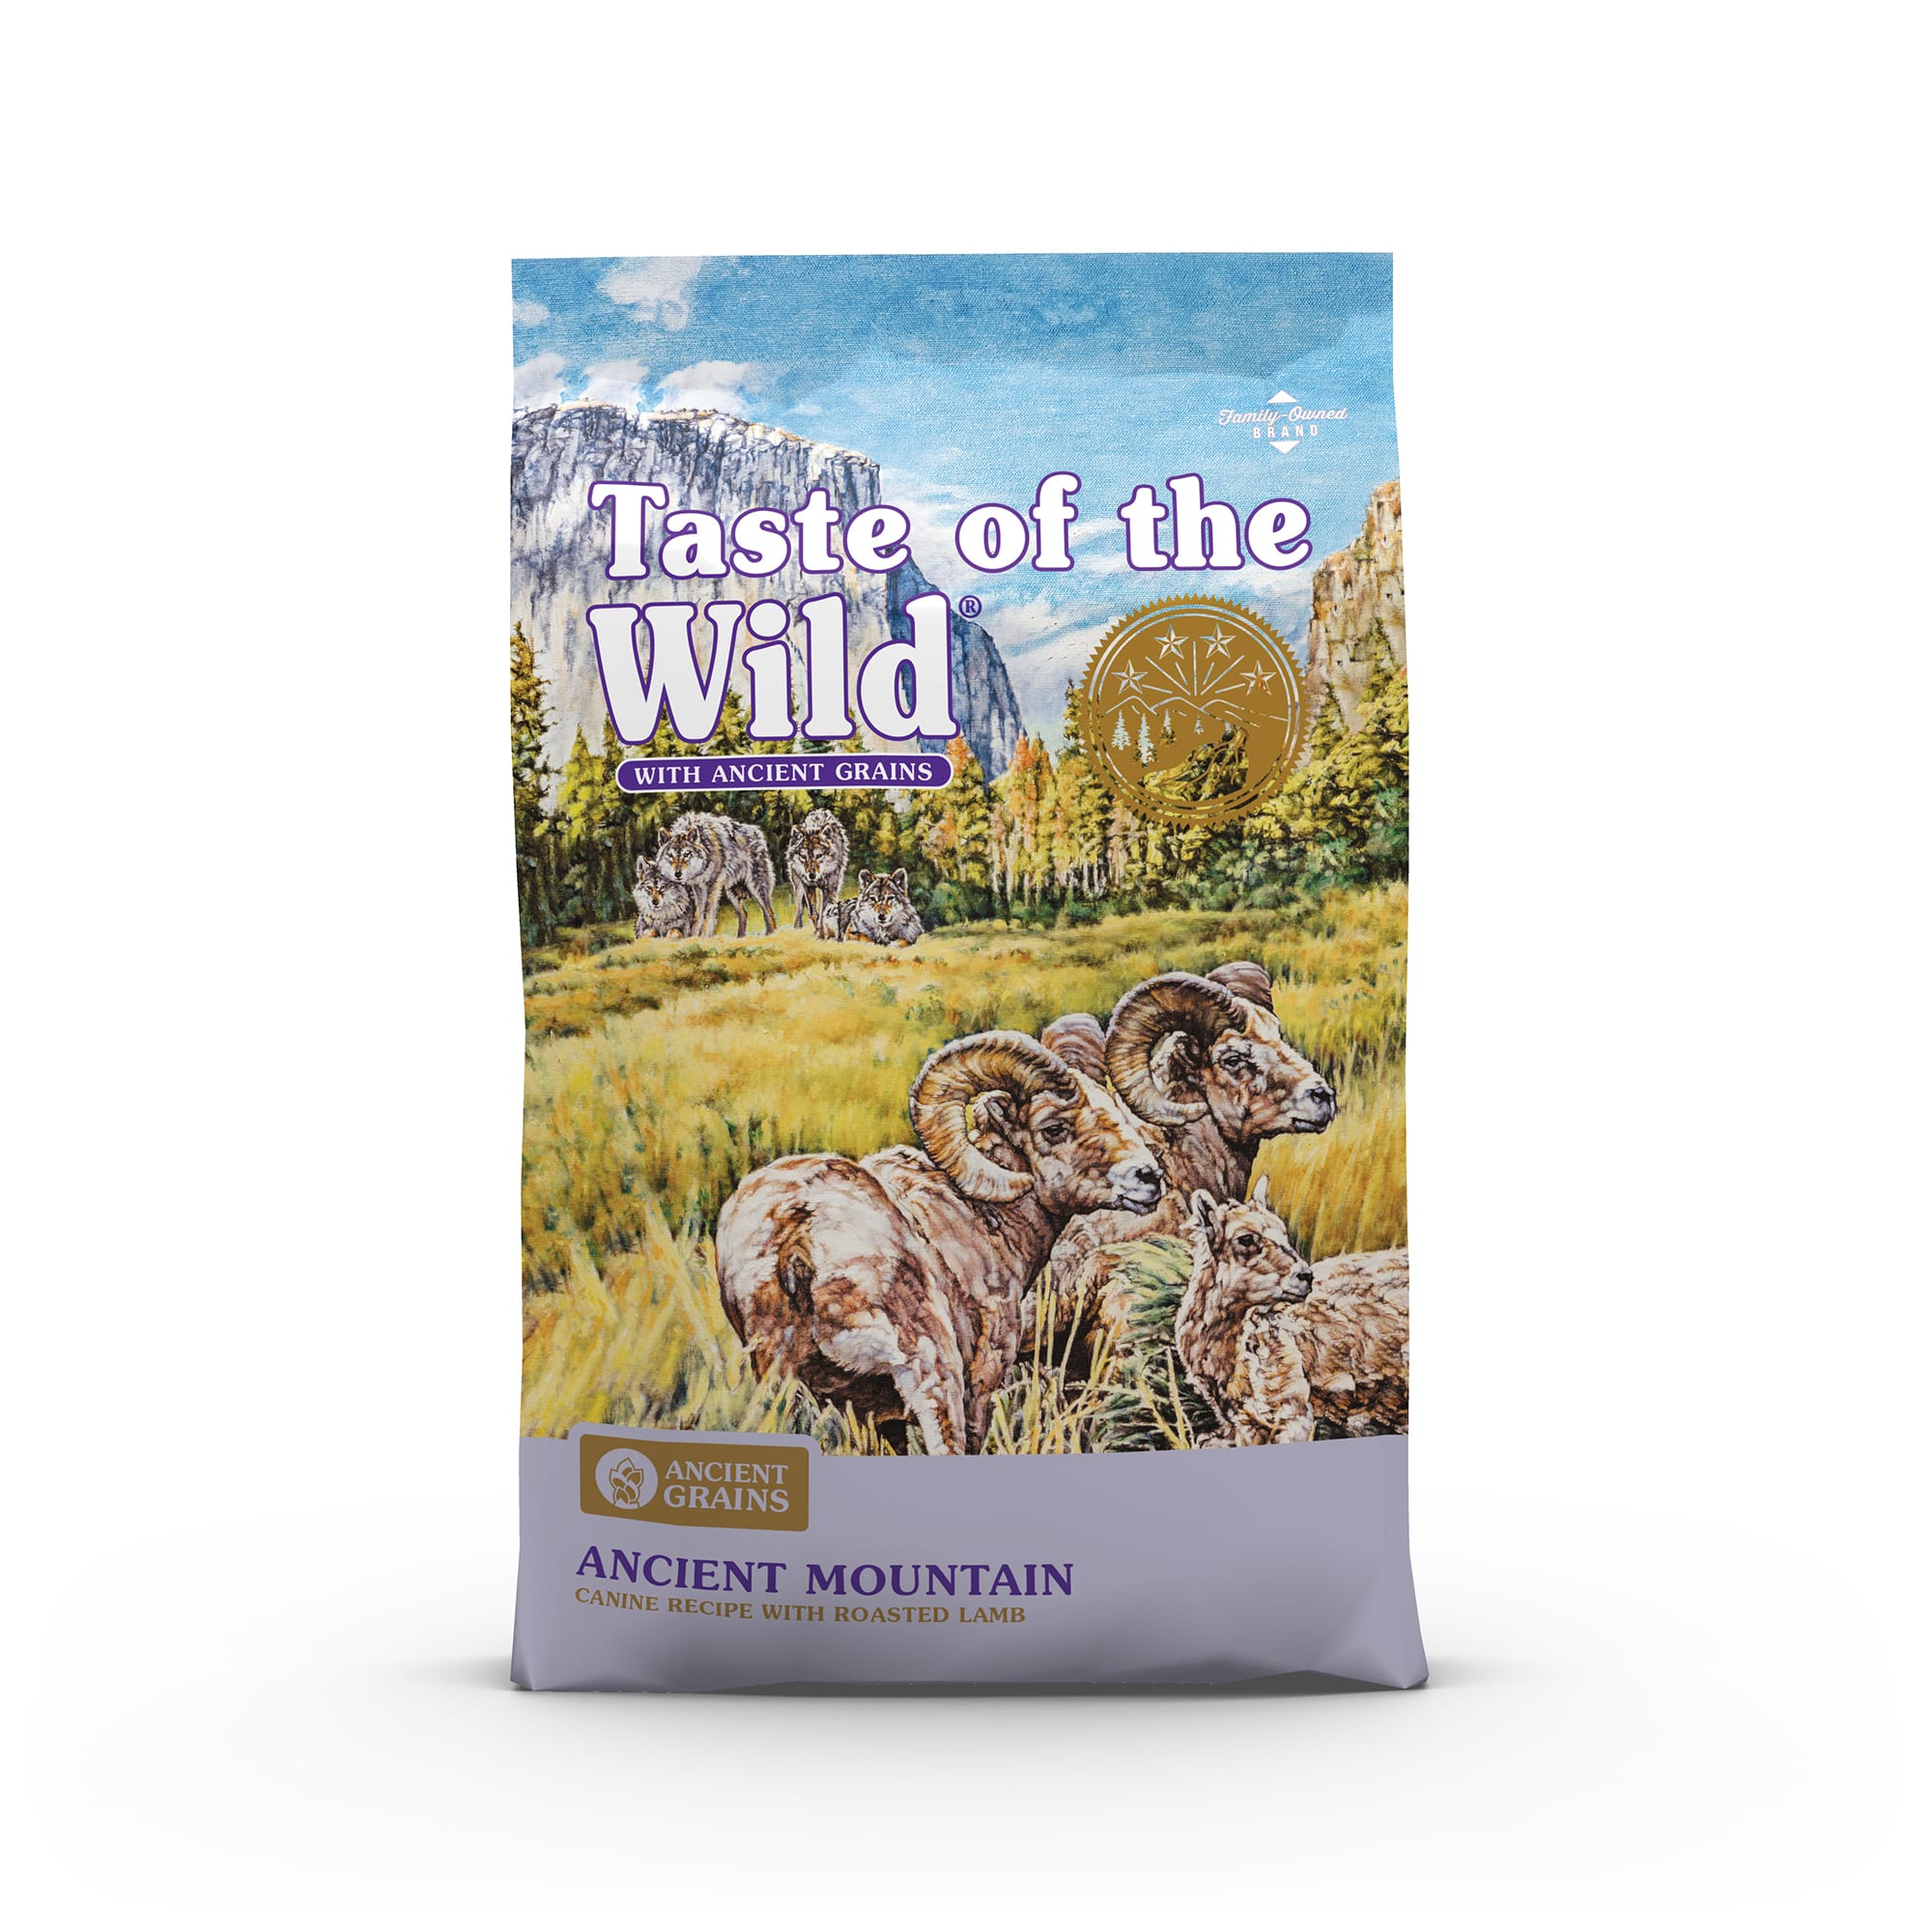 Taste of the Wild Ancient Mountain with Roasted Lamb and Ancient Grains Dry Dog Food, 14 lbs.